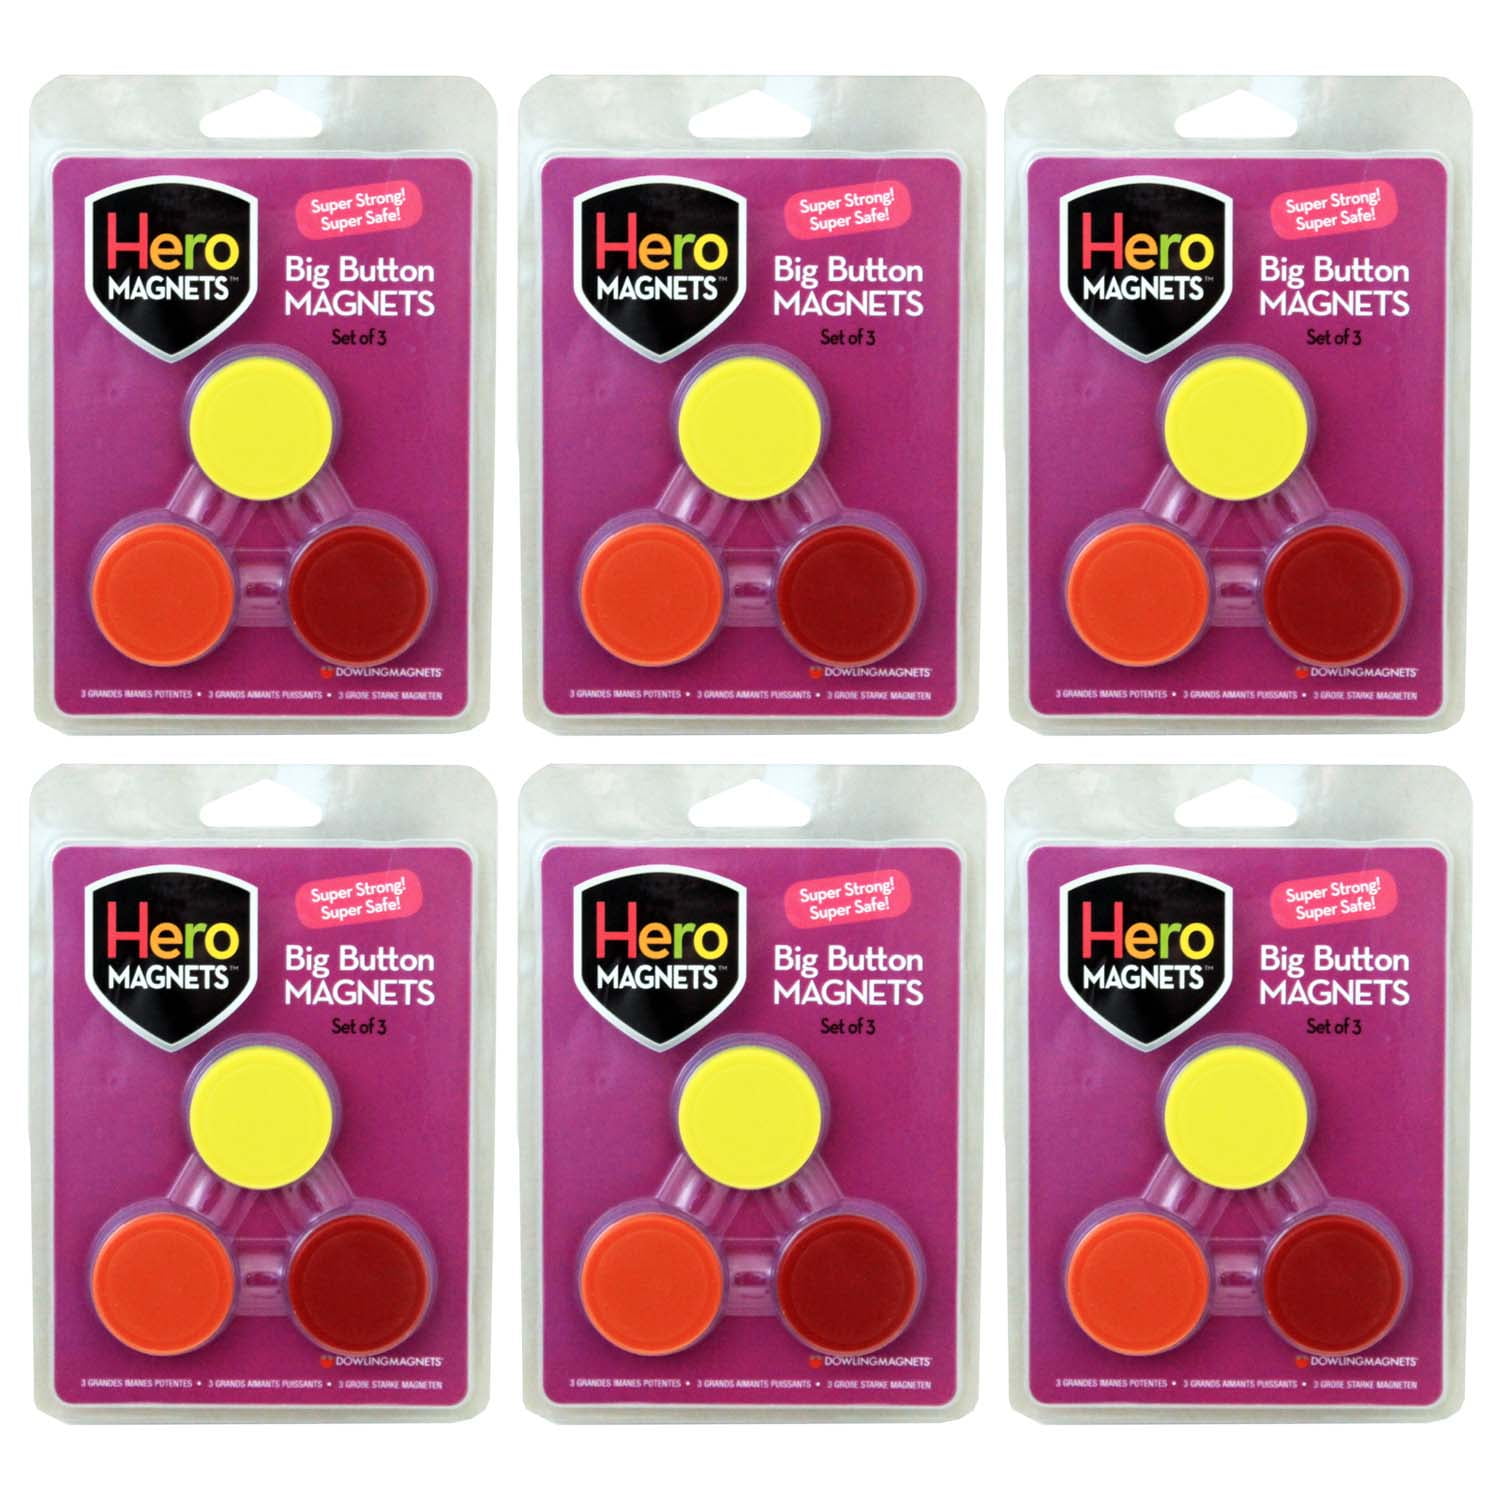 Dowling Magnets Hero Magnets: Big Button Magnets, 3 Per Pack, 6